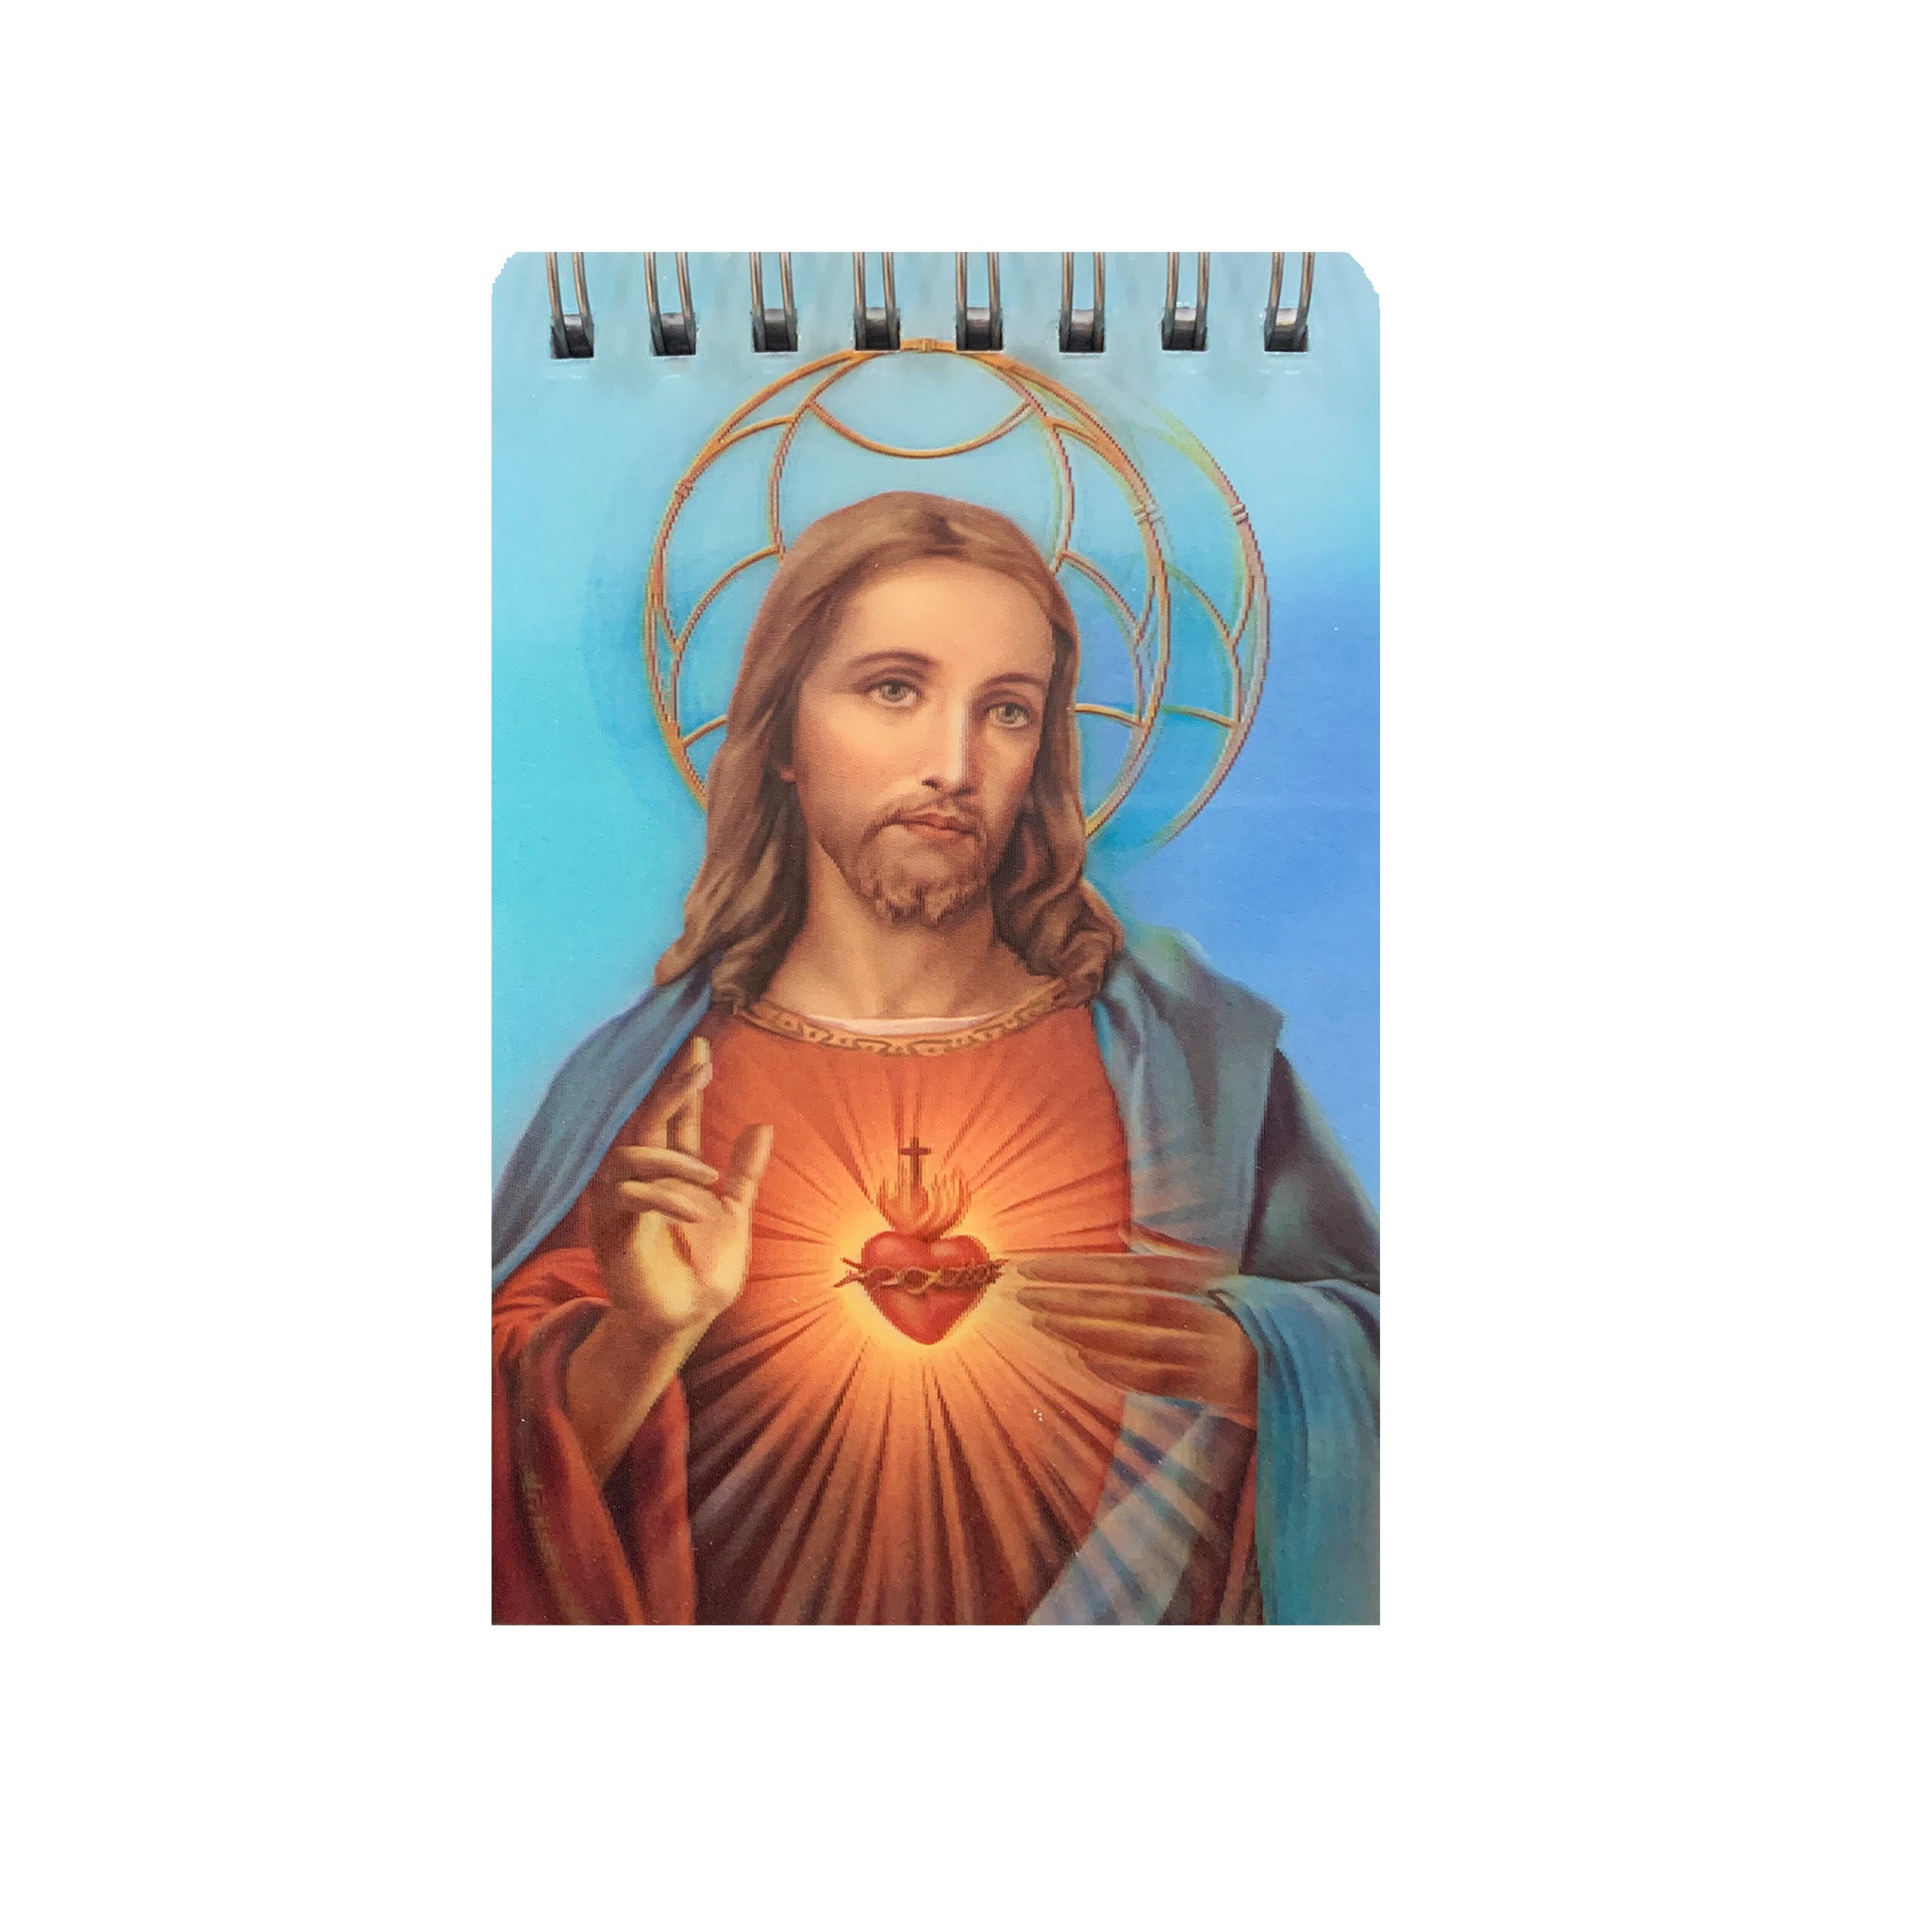 scared heart of Jesus note book